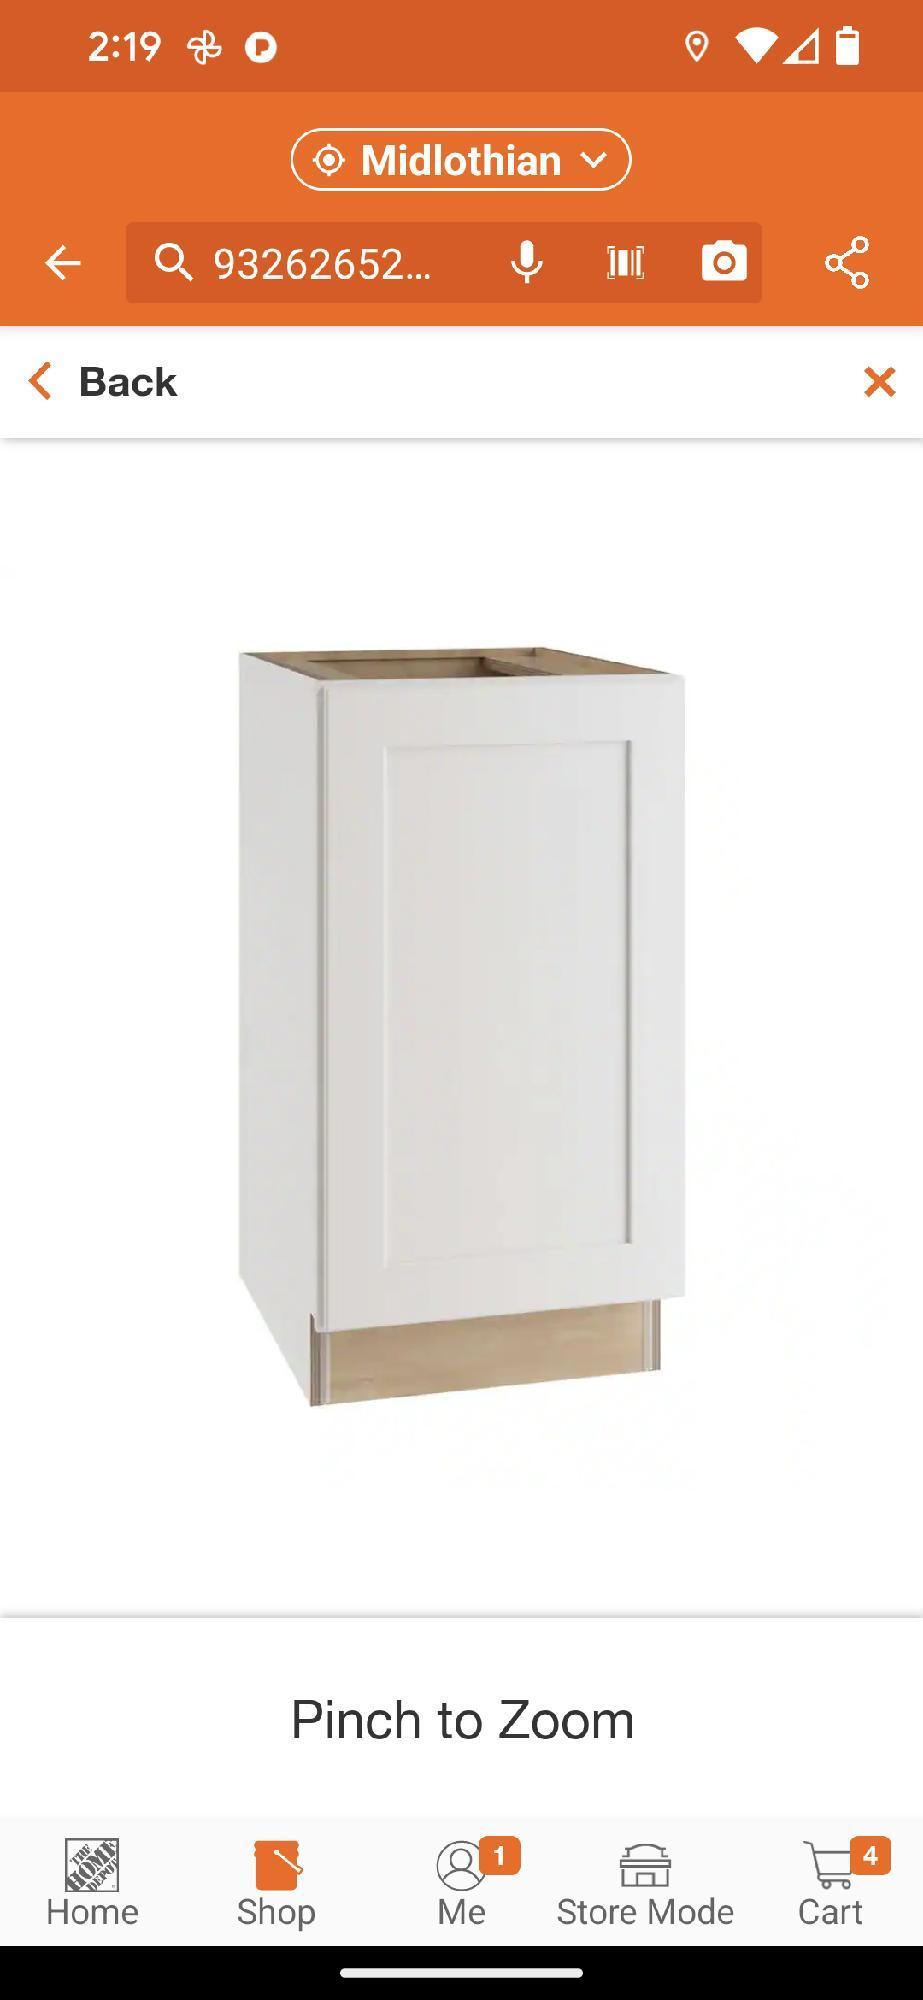 Home Decorators Collection Newport Pacific White Plywood Shaker Assembled Base Kitchen Cabinet FH